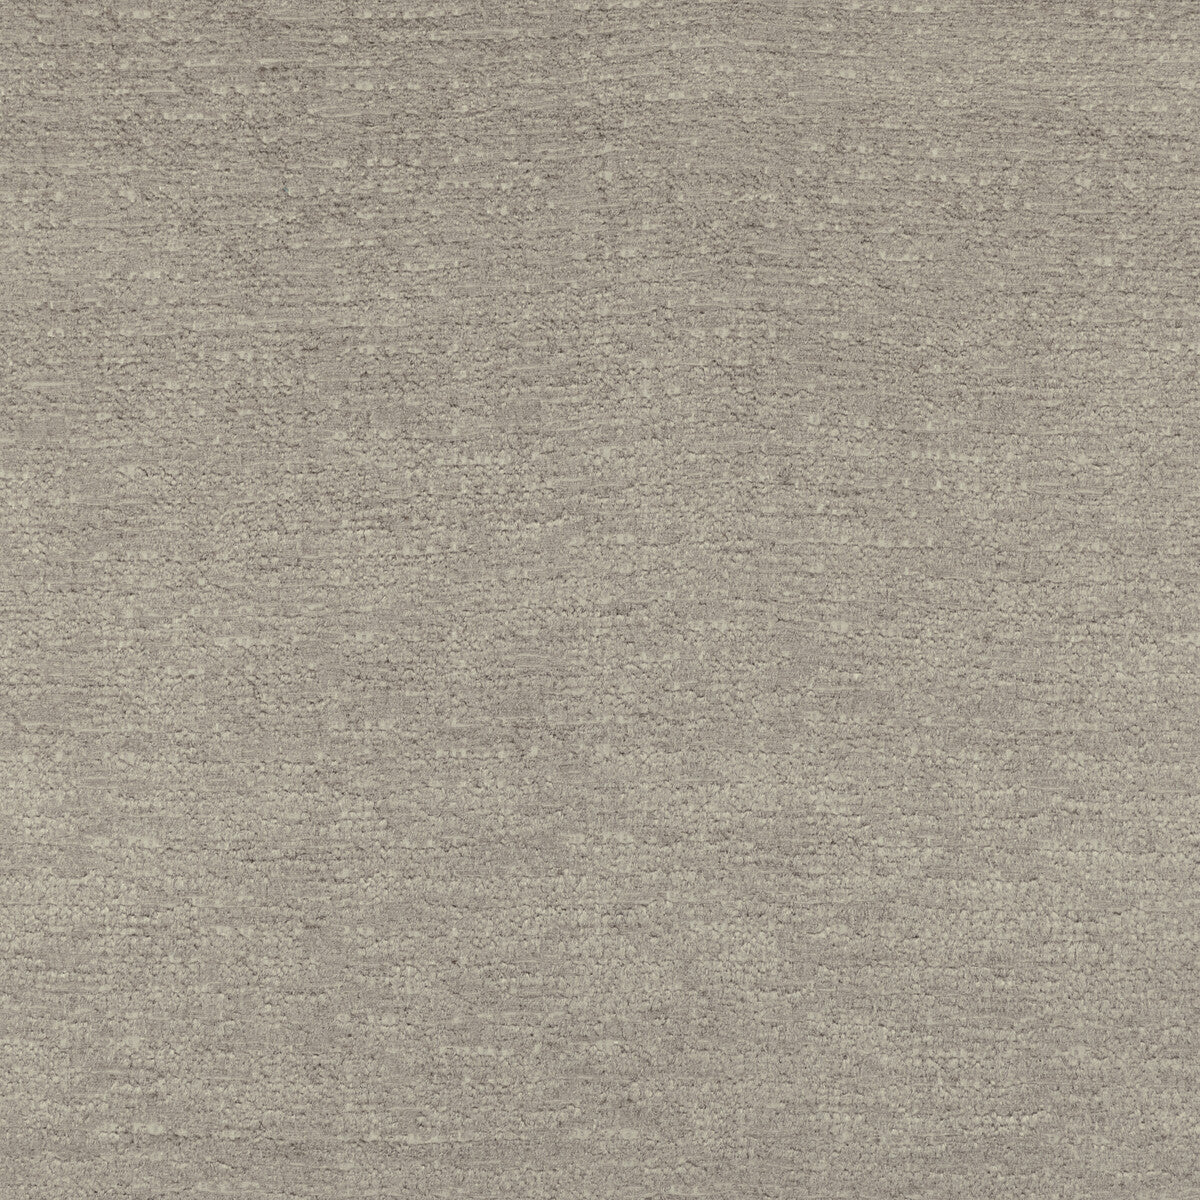 Plume fabric in smoke color - pattern GWF-3761.11.0 - by Lee Jofa Modern in the Kelly Wearstler VI collection